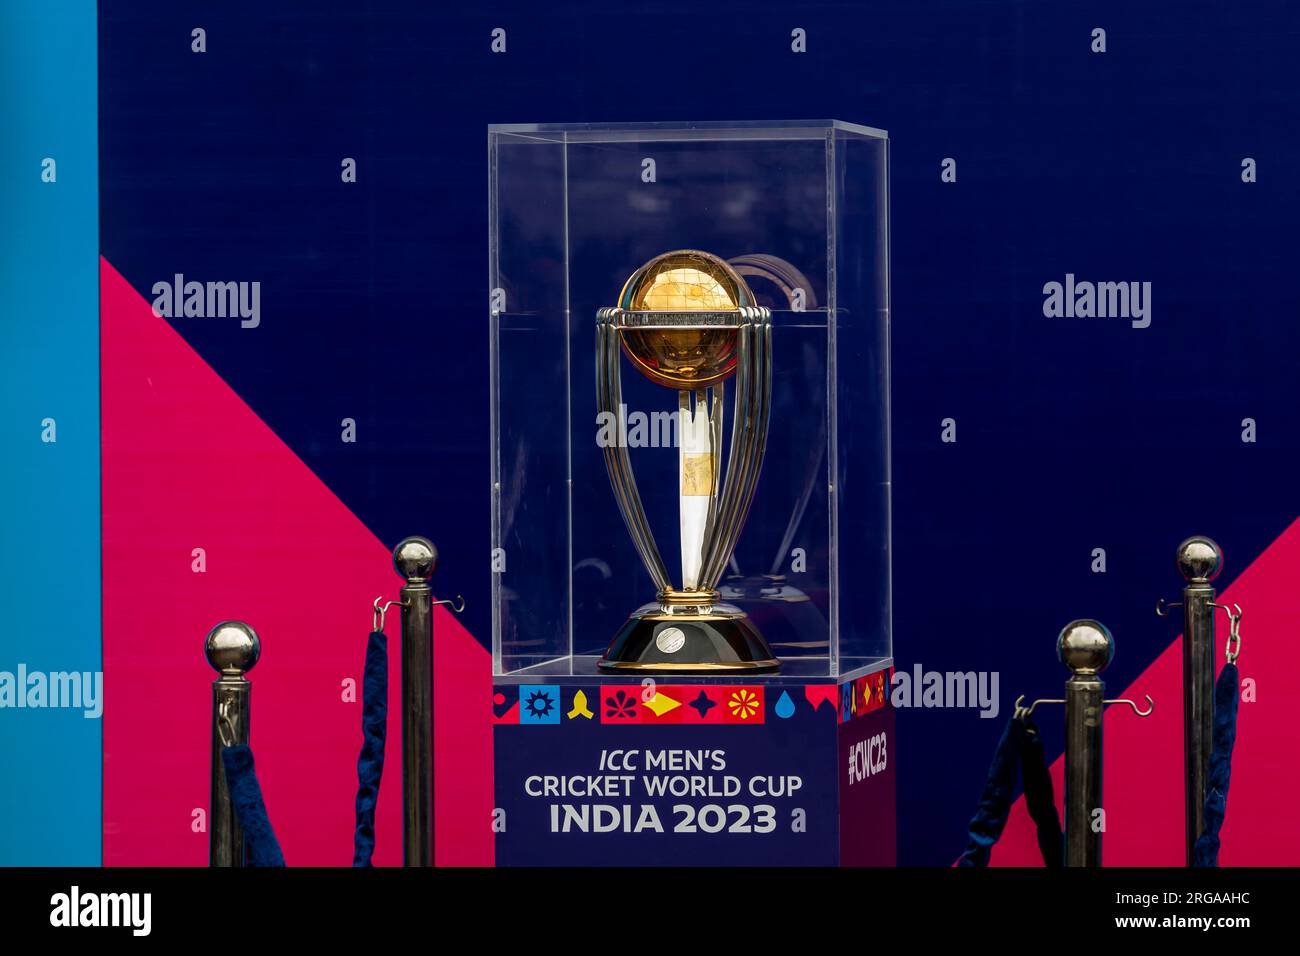 Dhaka, Bangladesh. 08th Aug, 2023. ICC Men's Cricket World Cup trophy seen on display at the Sher-e-Bangla National Stadium in Mirpur, Dhaka. ICC Men's Cricket World Cup trophy tour in Bangladesh runs from 07 till 09 August 2023. (Photo by Sazzad Hossain/SOPA Images/Sipa USA) Credit: Sipa USA/Alamy Live News Stock Photo